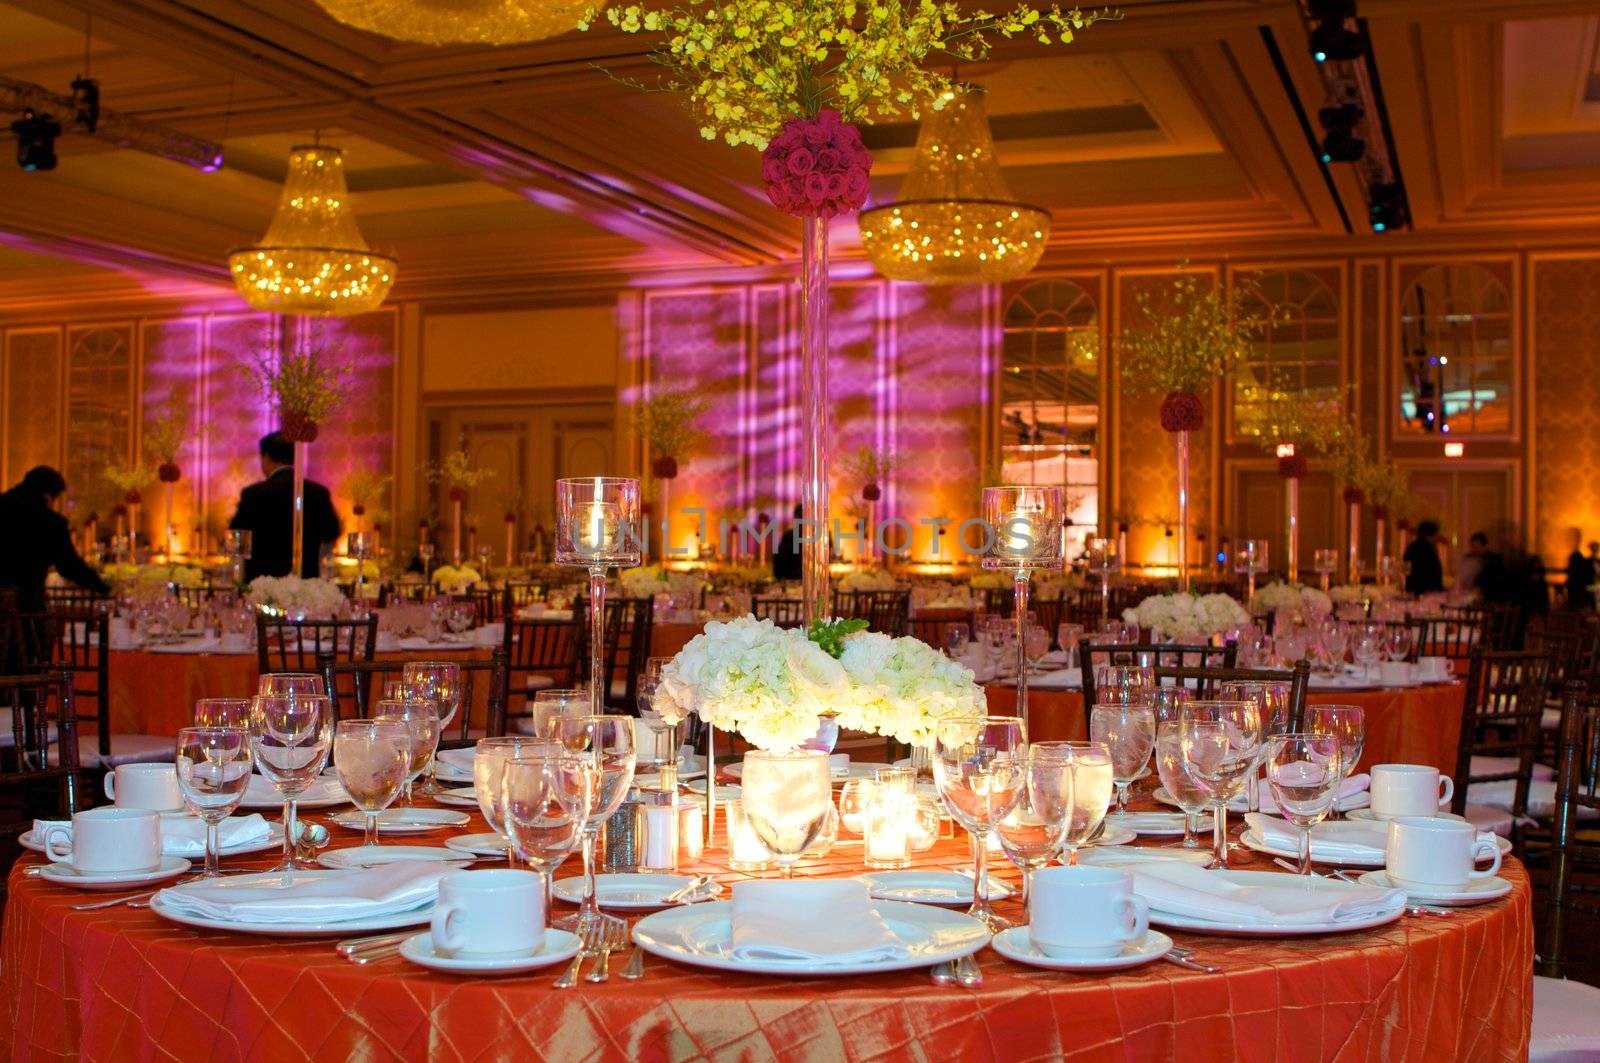 Table setting at a luxury wedding reception